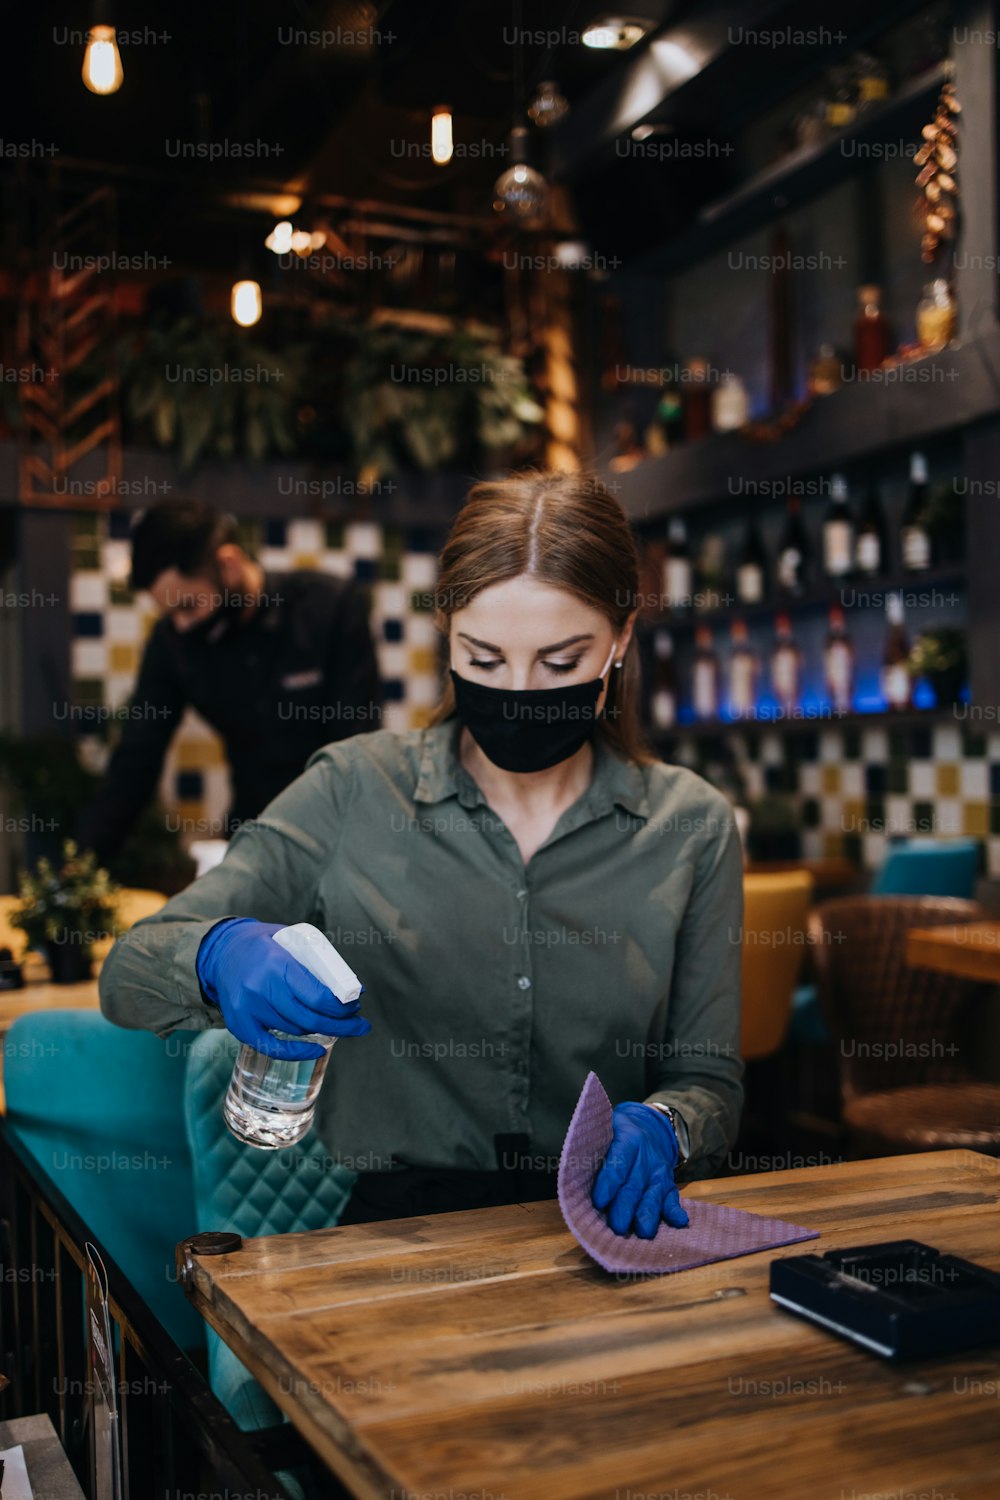 Young restaurant workers waiters cleaning and disinfecting tables and surfaces against Coronavirus pandemic disease. They are wearing protective face masks and gloves.